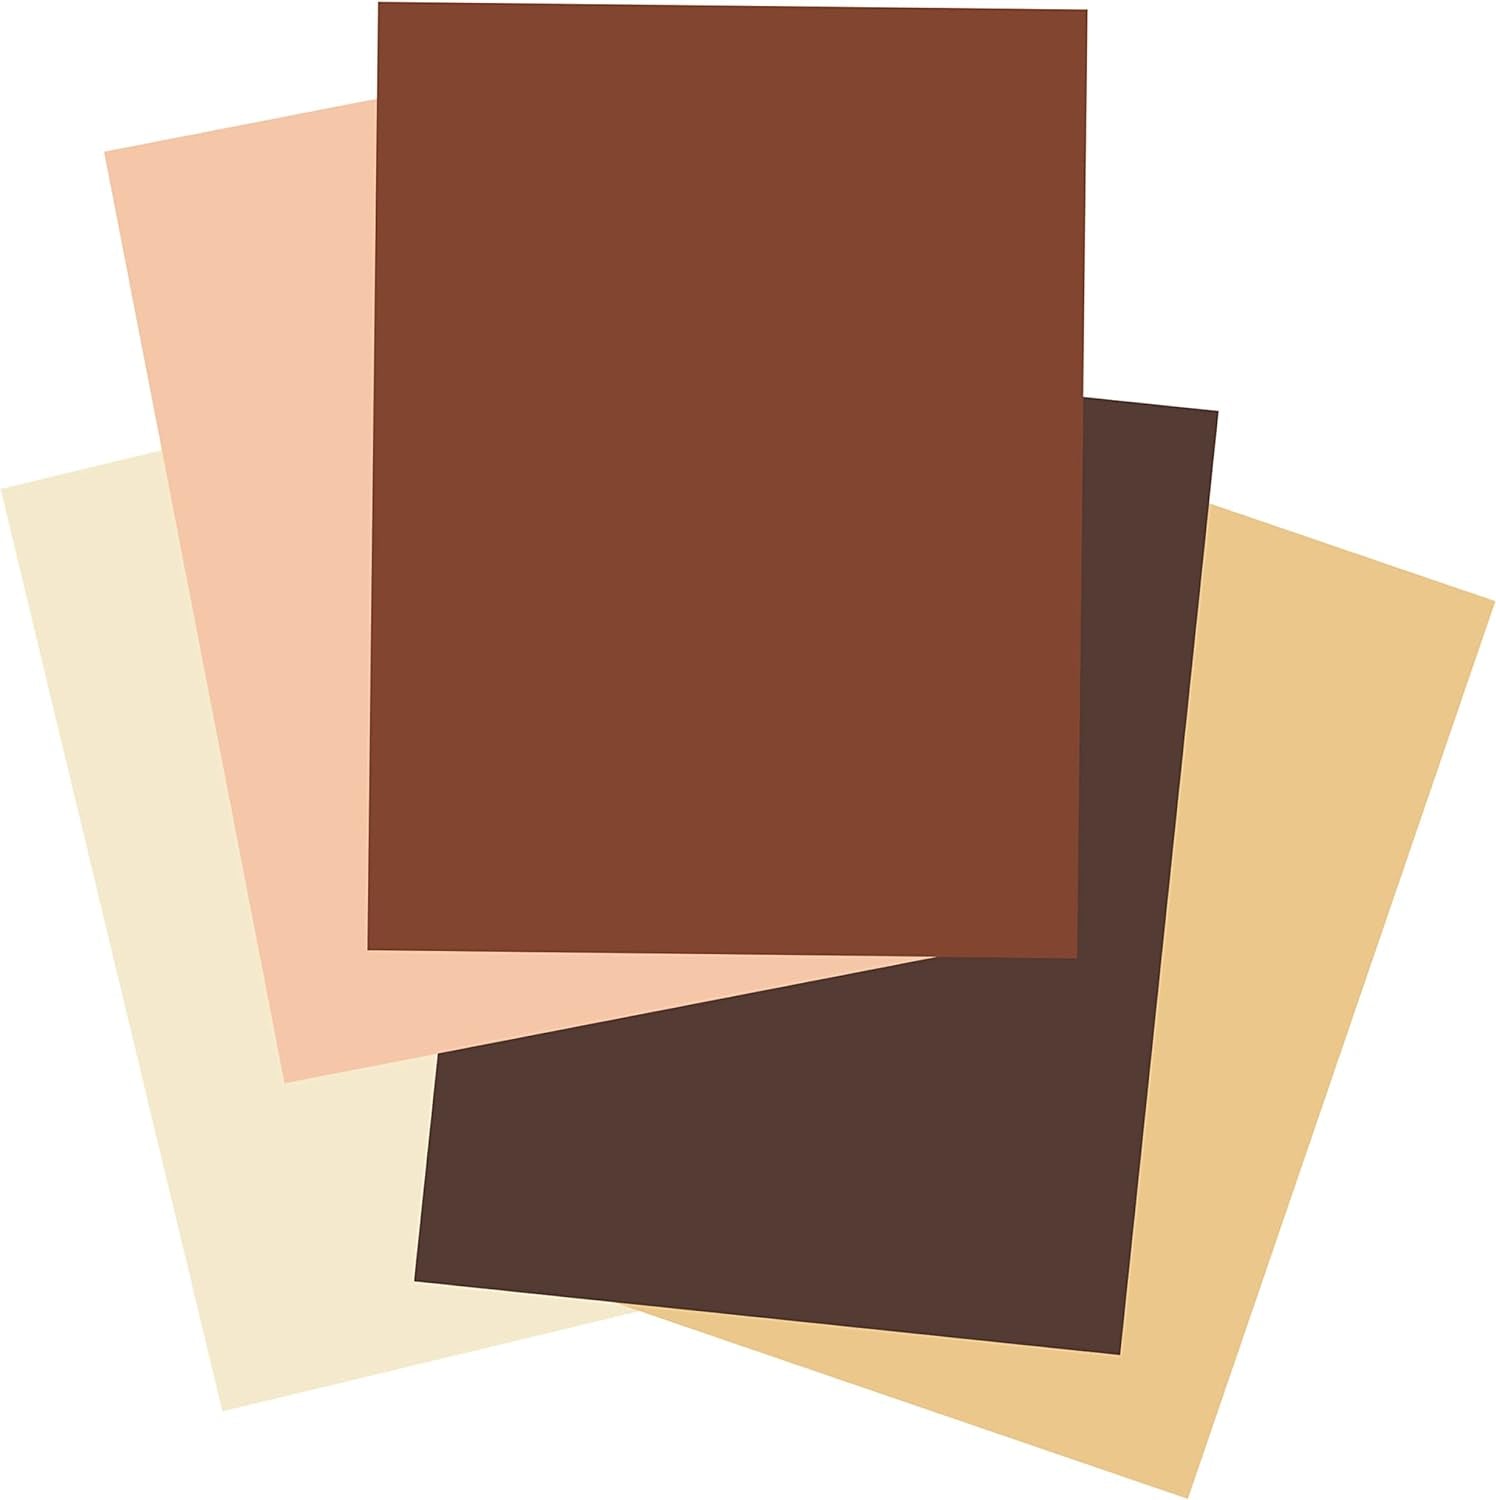 Shades of Me Construction Paper, 5 Assorted Skin Tone Colors, 9" X 12", 50 Sheets